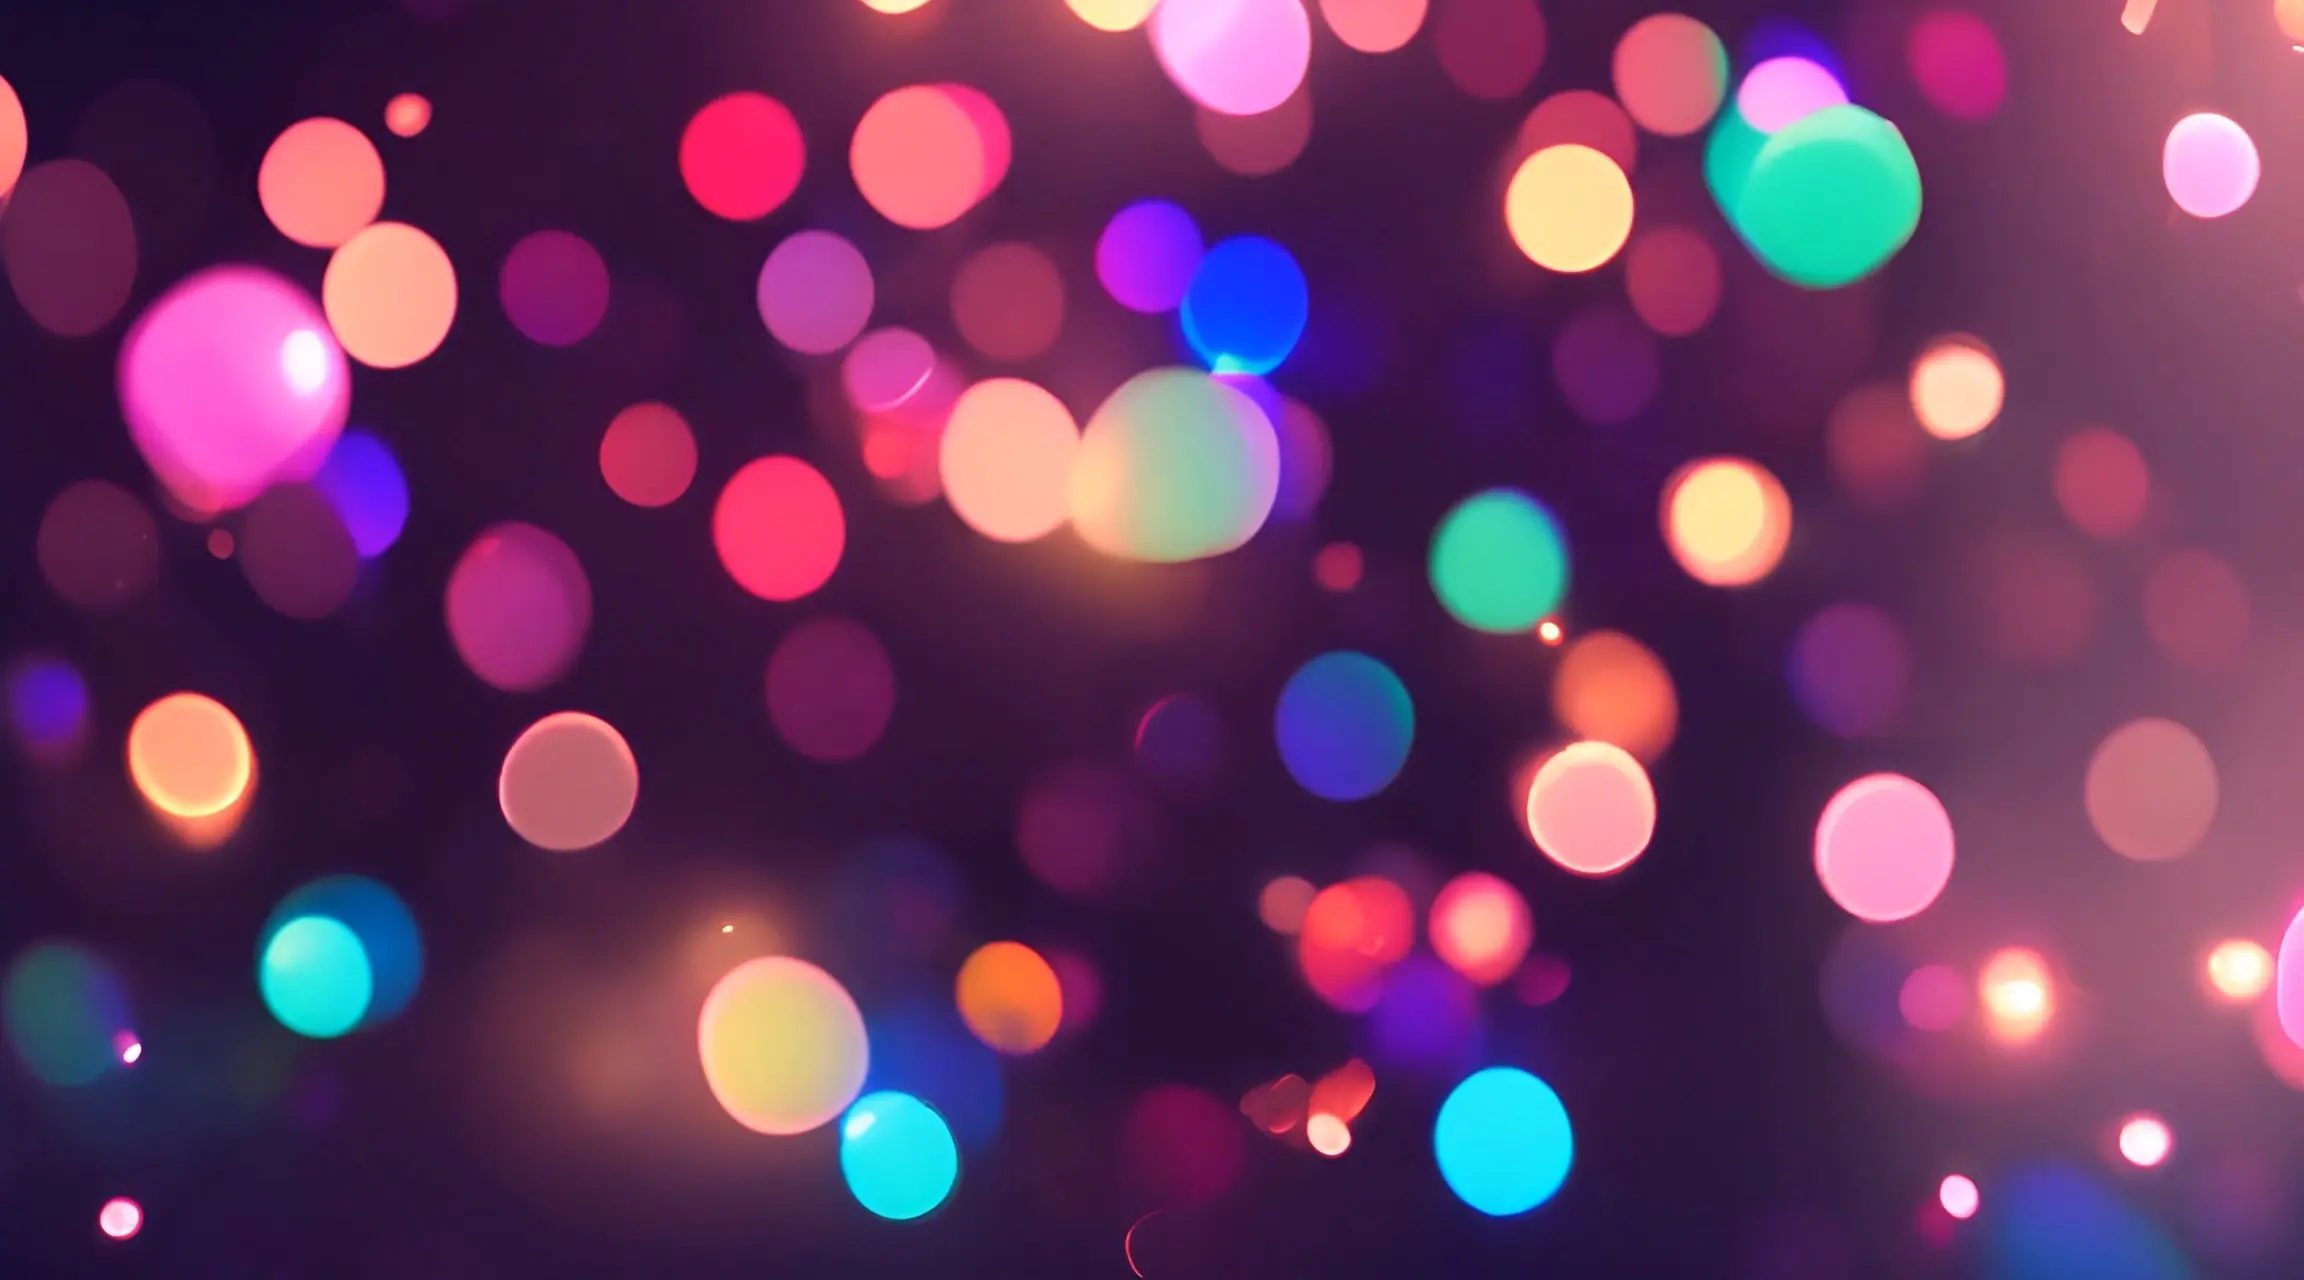 Vibrant Blurry Floating Colorful Orbs Backdrop Video